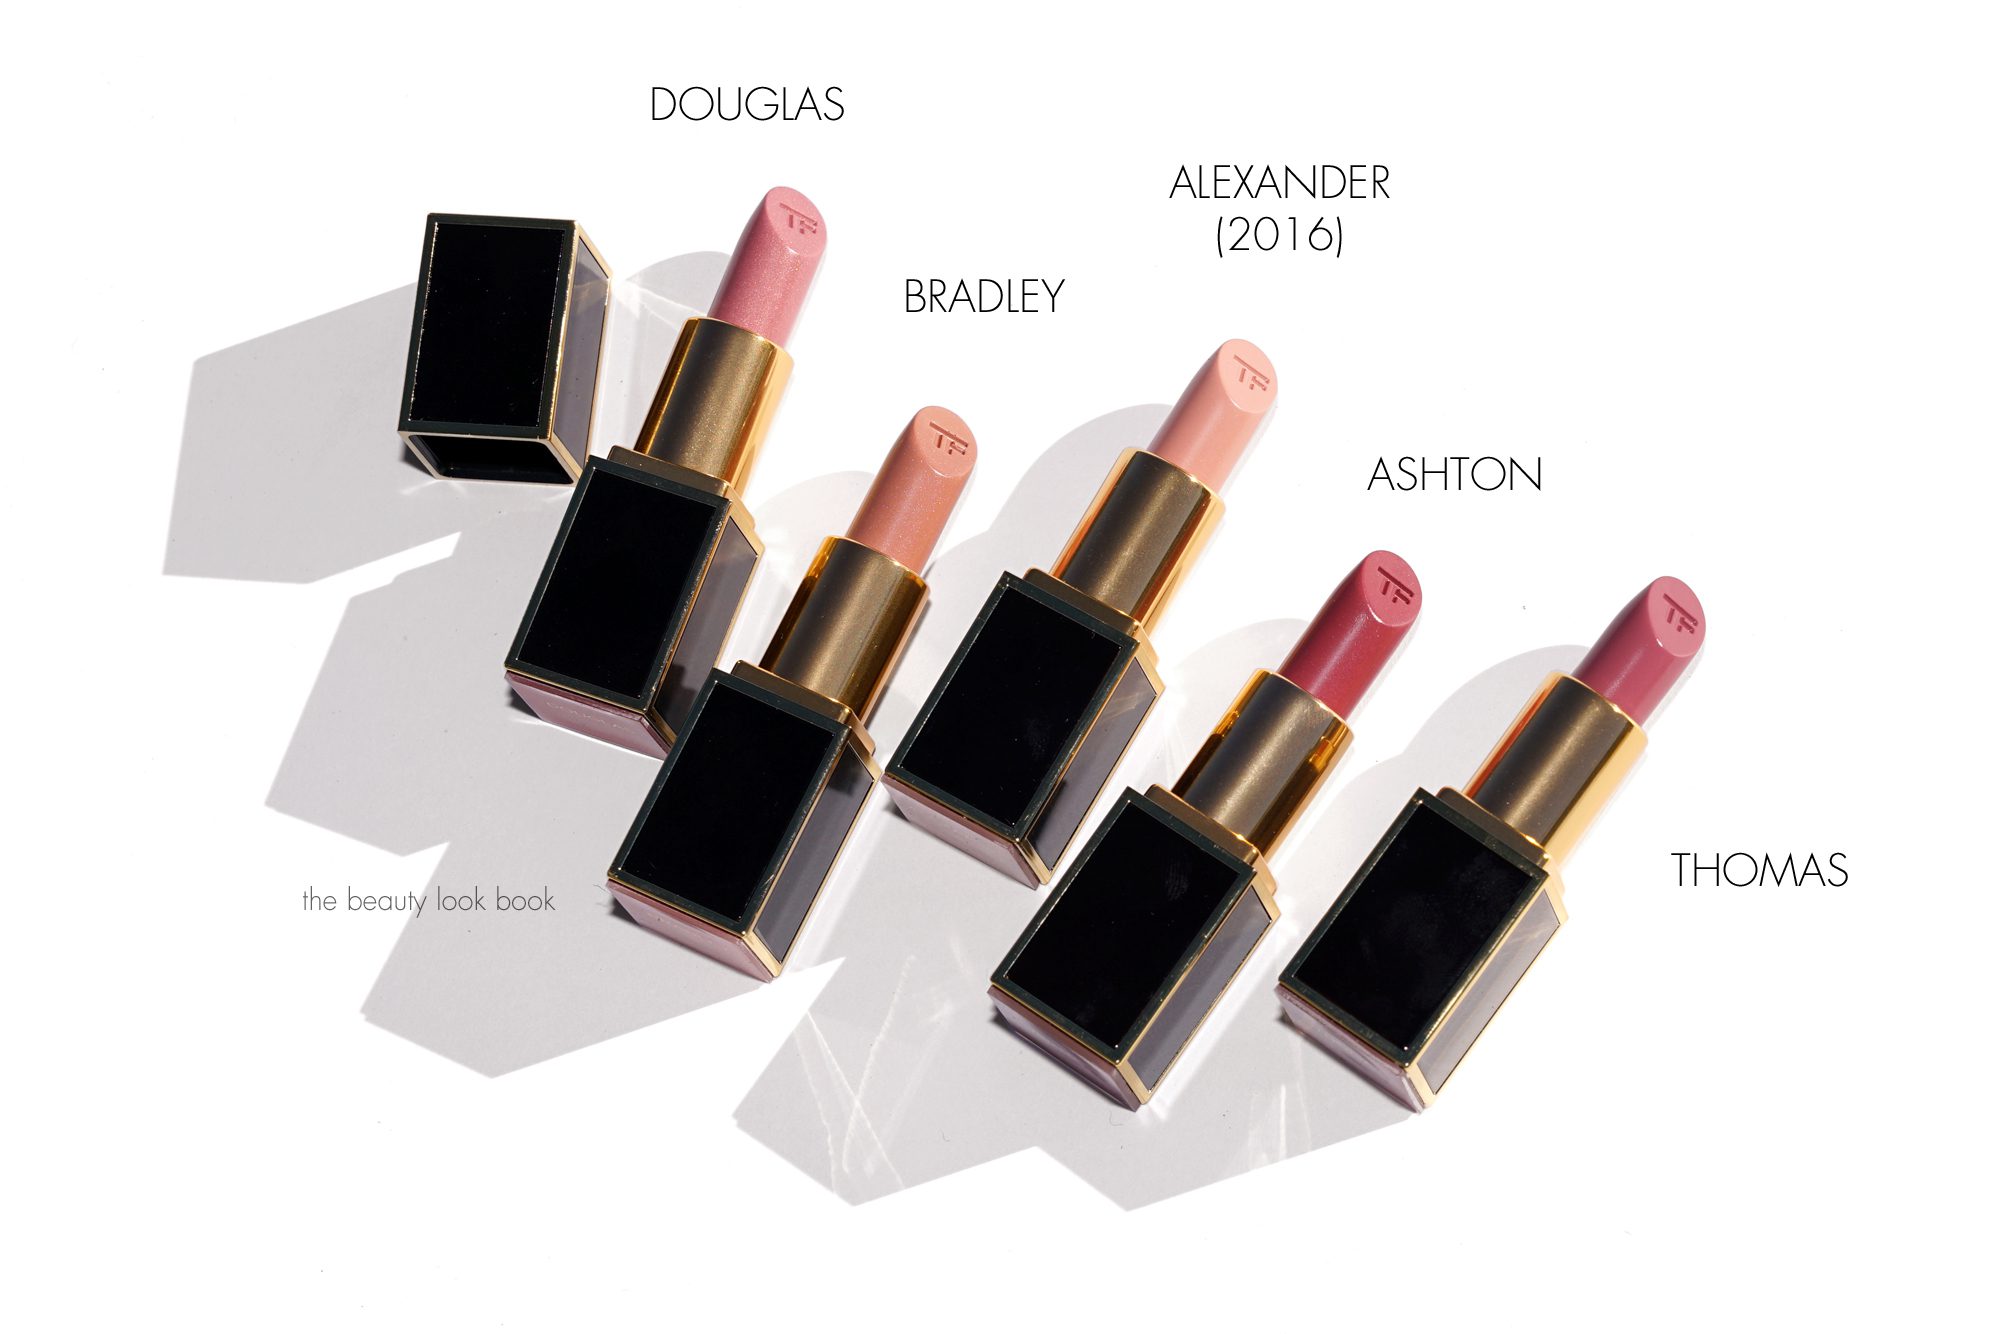 Tom Ford Lips and Boys - 25 New Shades for 2016 - The Beauty Look Book